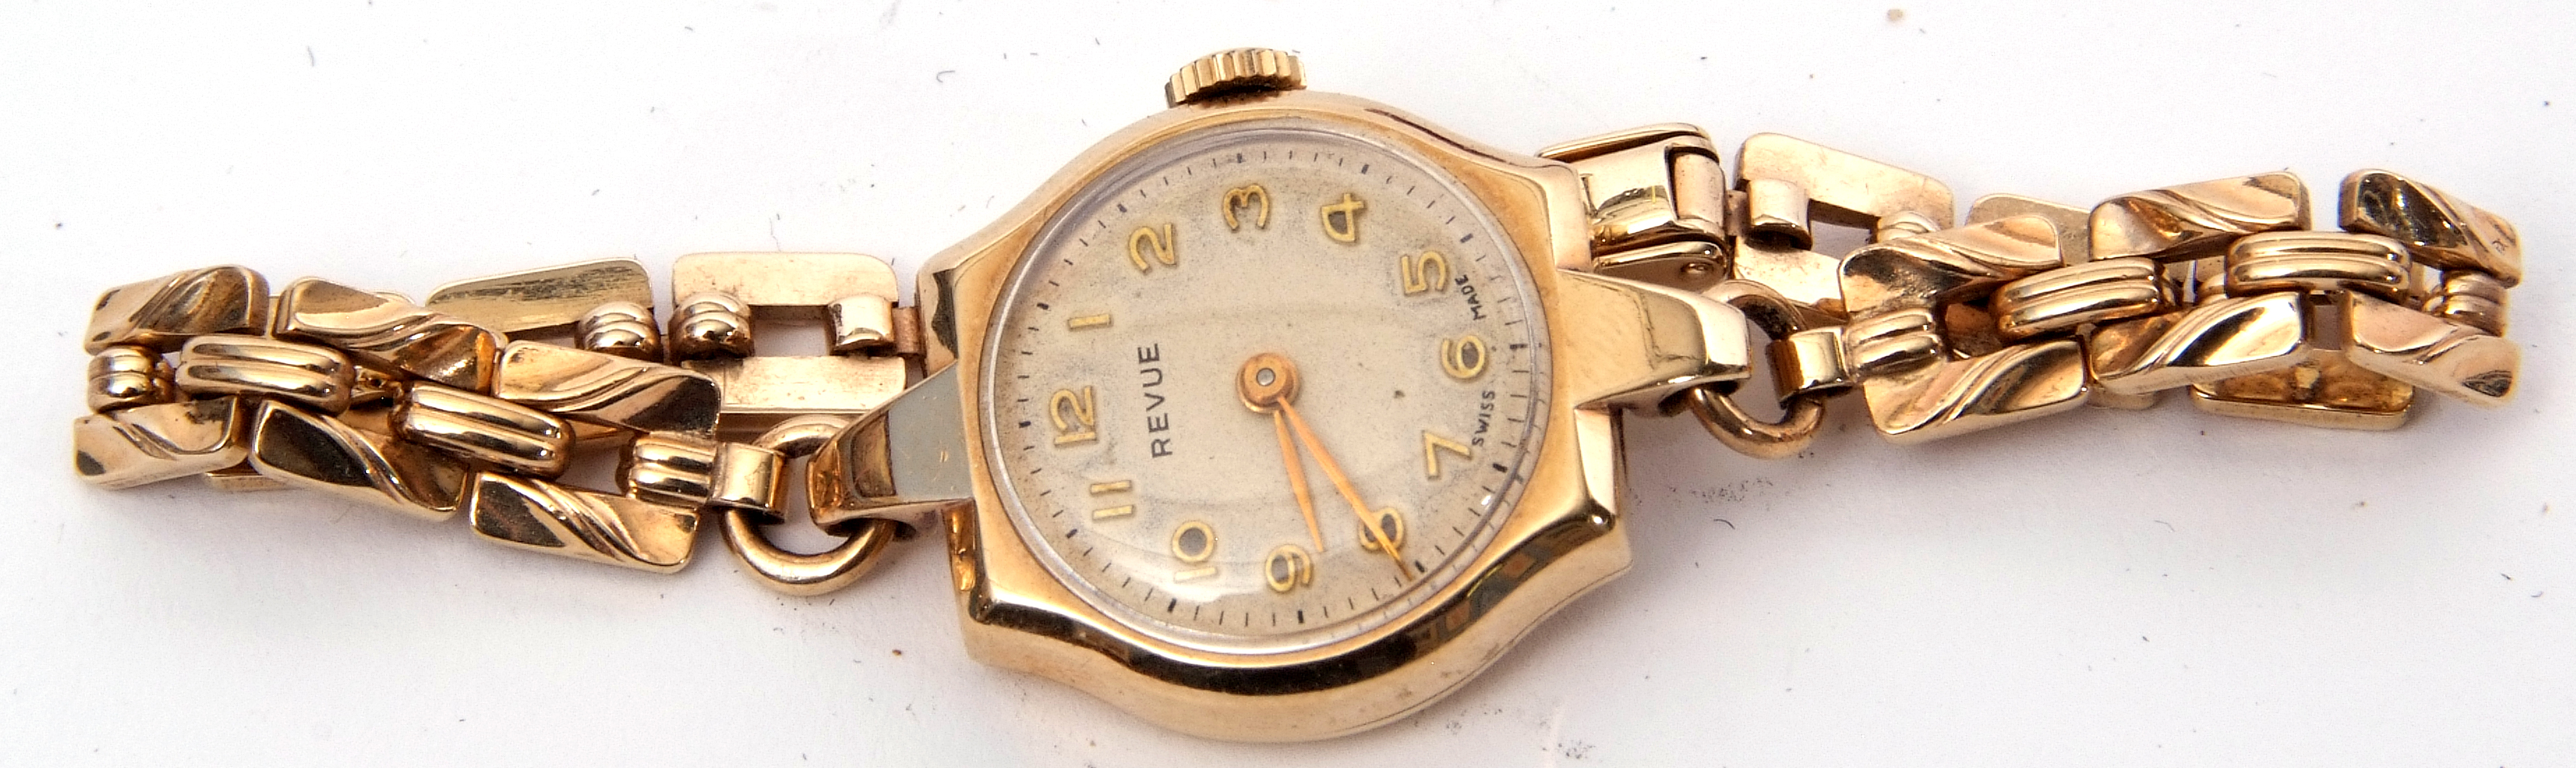 Ladies 9ct gold cased Revue wrist watch with gold hands to a cream coloured dial with raised gold - Image 3 of 4